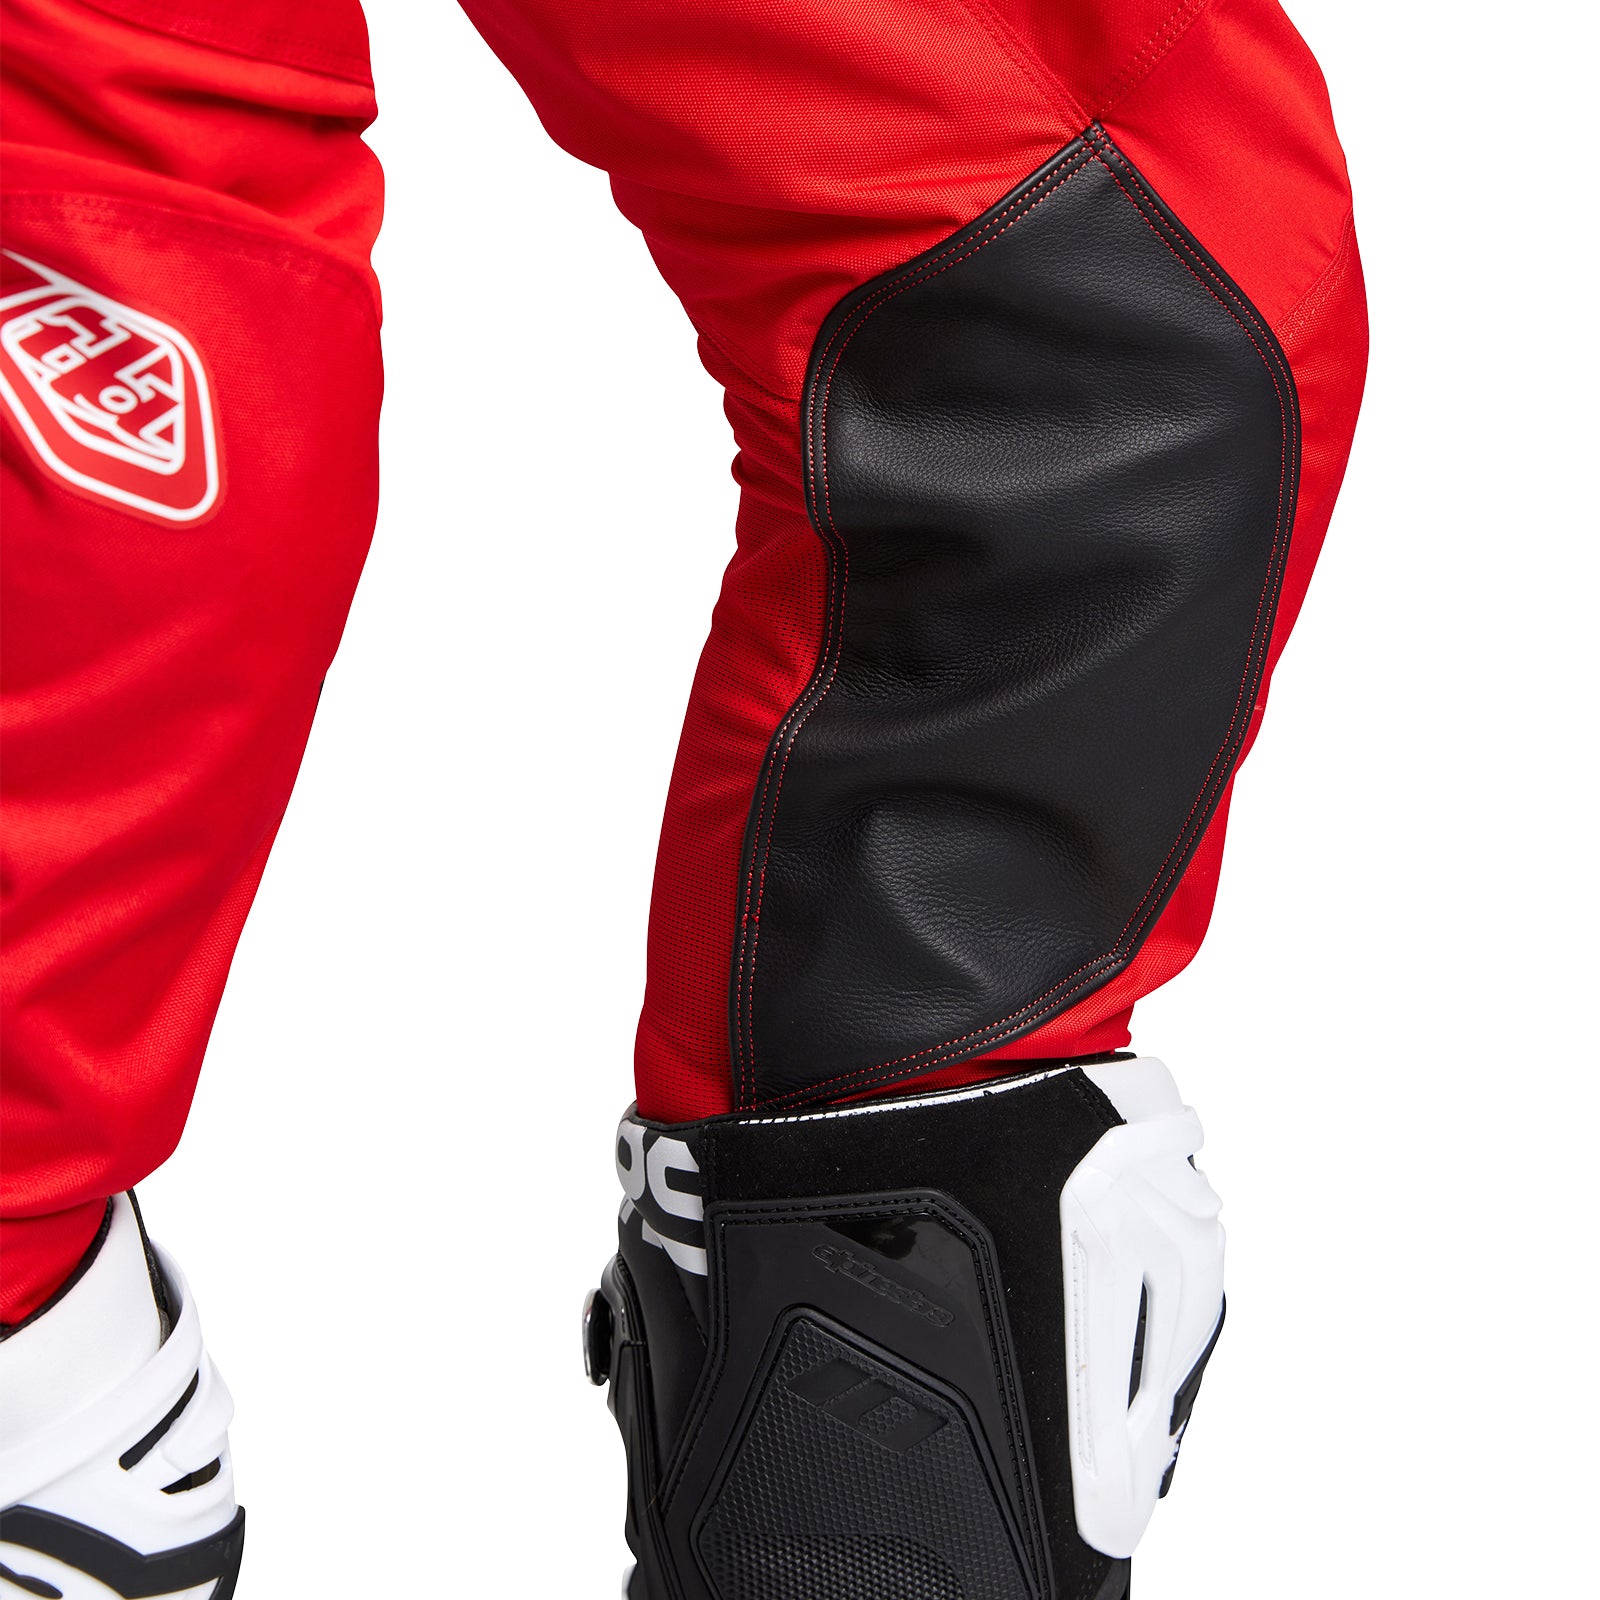 Factory Outlet!! Troy Lee Designs MOTO GP Motocross Pants TLD Downhill Pants  Mountain biking trousers with Pad orange - AliExpress